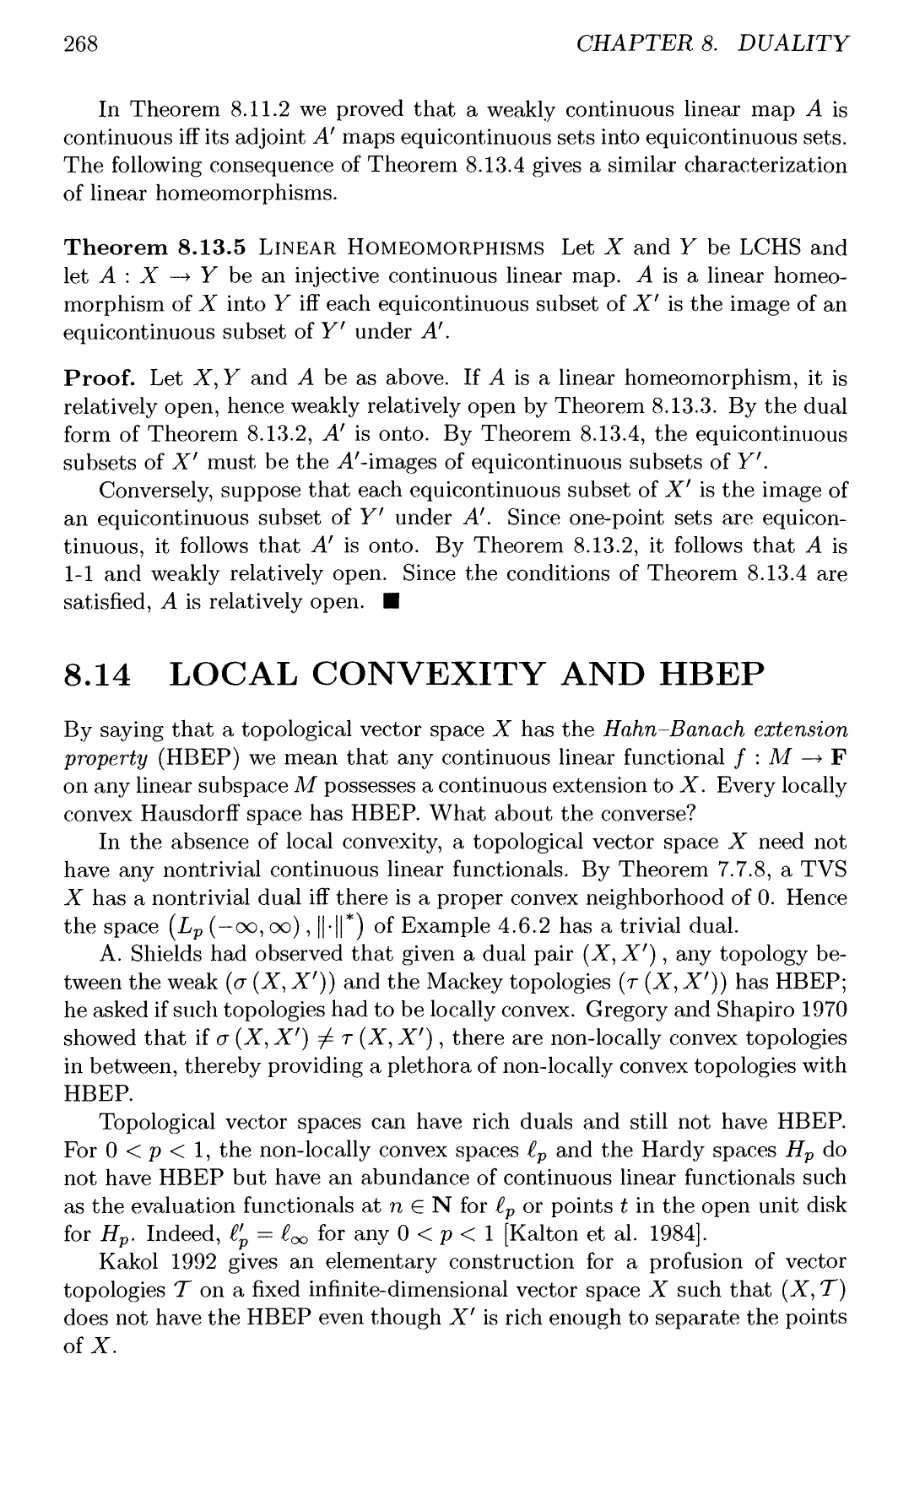 8.14 LOCAL CONVEXITY AND HBEP